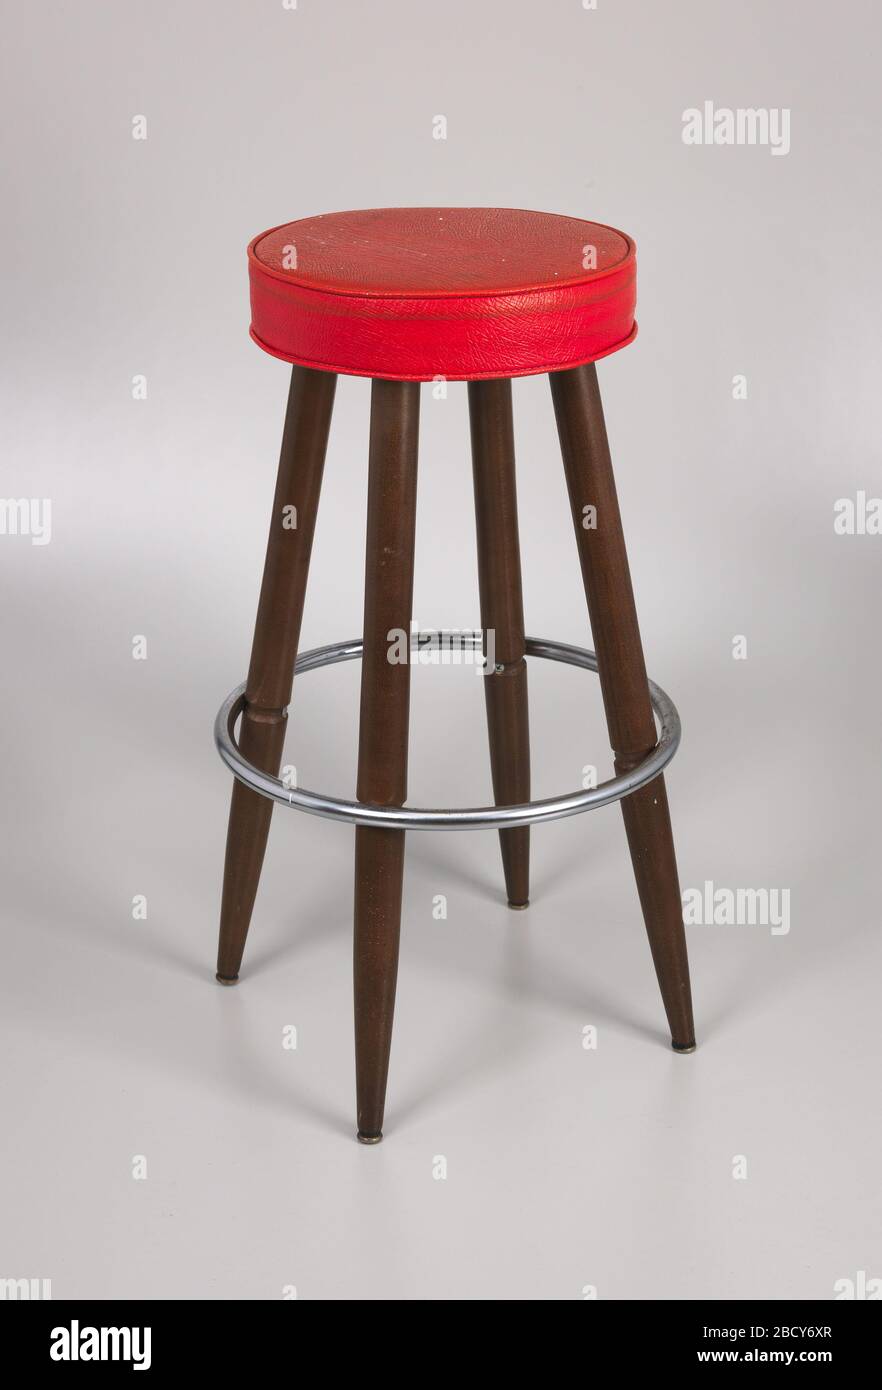 Barstool with red vinyl cover from Muse Bar the home bar of Isaiah Muse. A wood barstool with a red vinyl seat. The seat of the stool is thick foam covered by red vinyl that is stapled to a particle board seat base. The stool has four (4) legs made of lathe-shaped wood, with each leg tapering at the tip and finished with a metal cap. Barstool with red vinyl cover from Muse Bar the home bar of Isaiah Muse Stock Photo